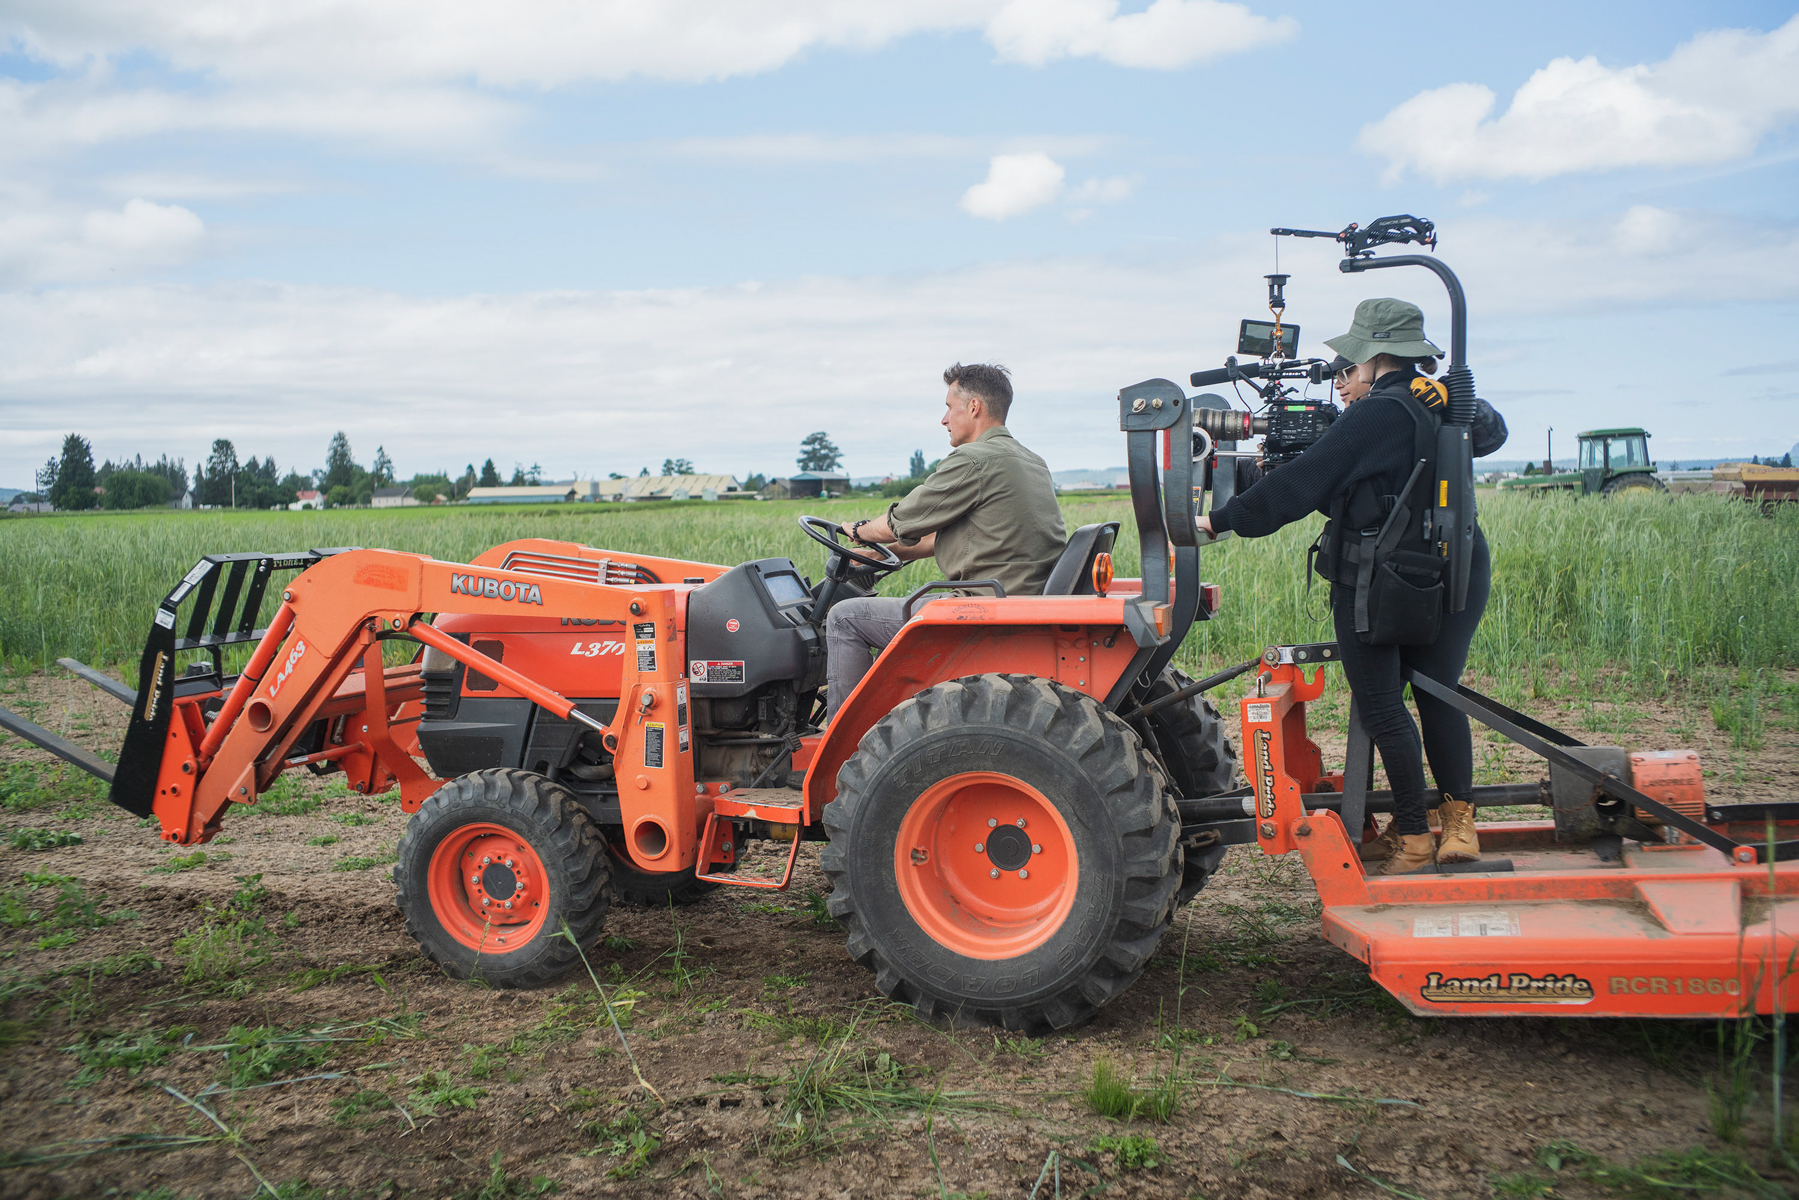 Chris Benzakein driving a tractor while being filmed